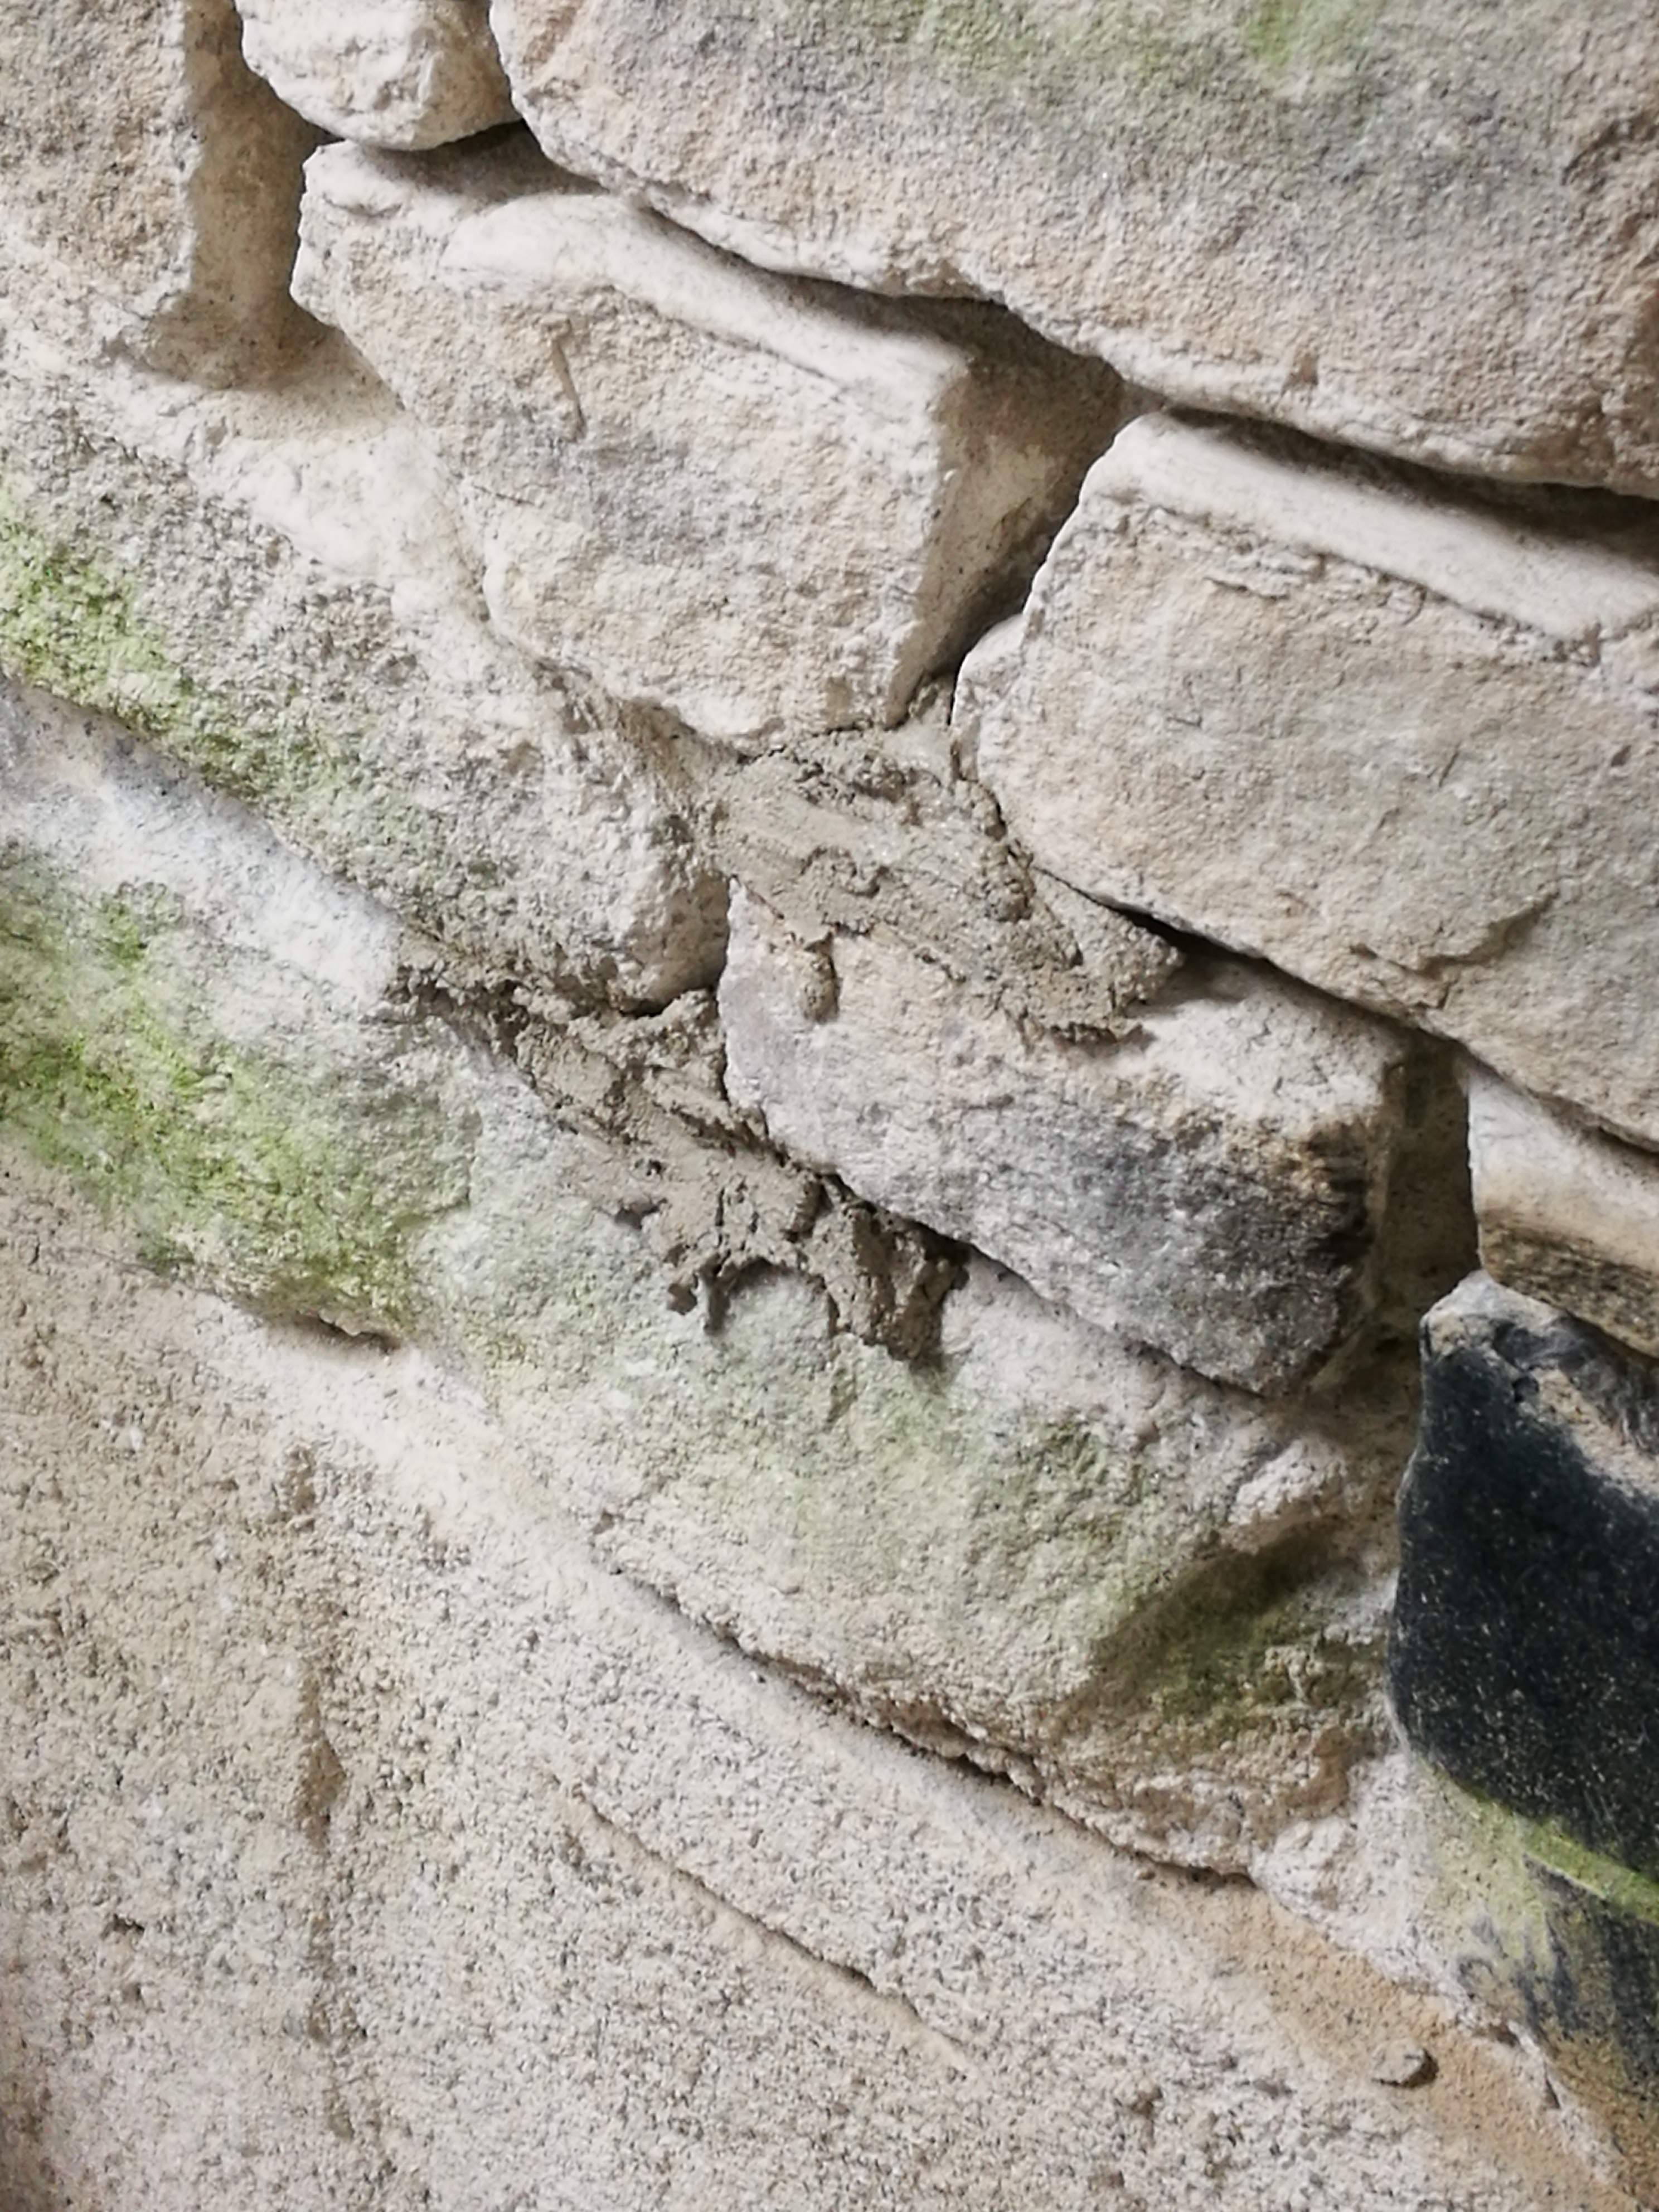 More pointing with lime mortar